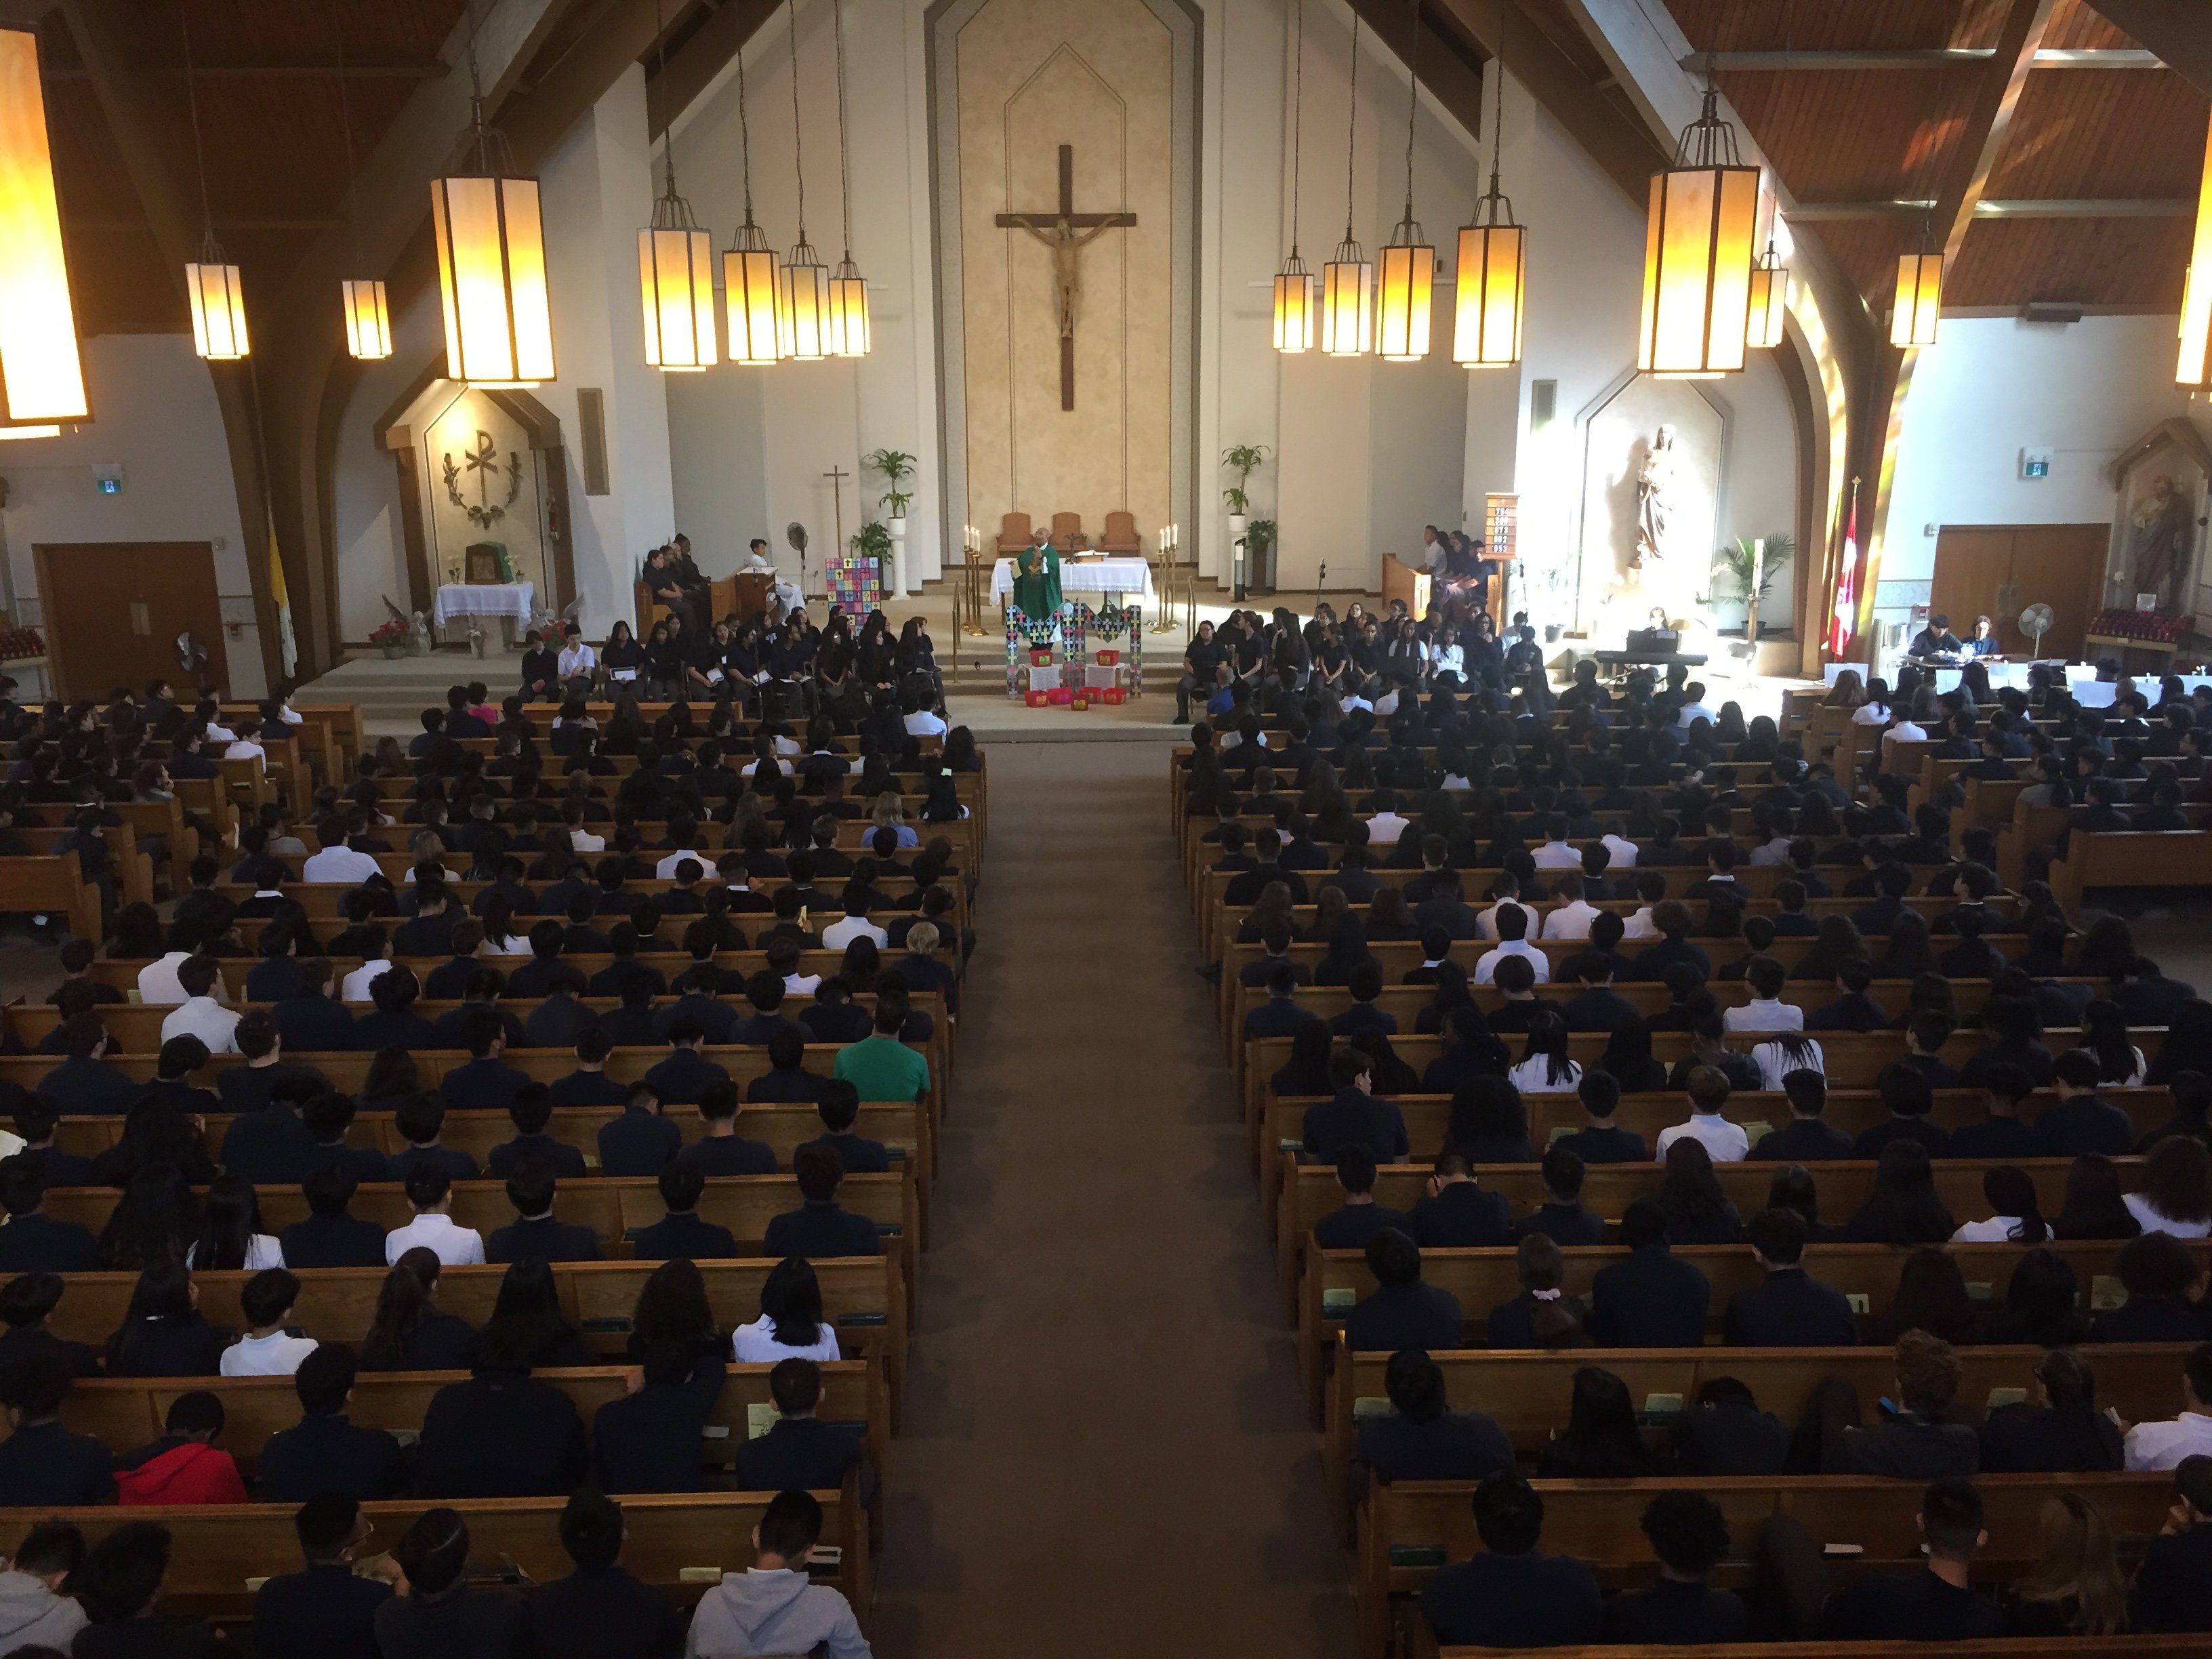 Picture from choir loft of Marshall McLuhan students attending Mass